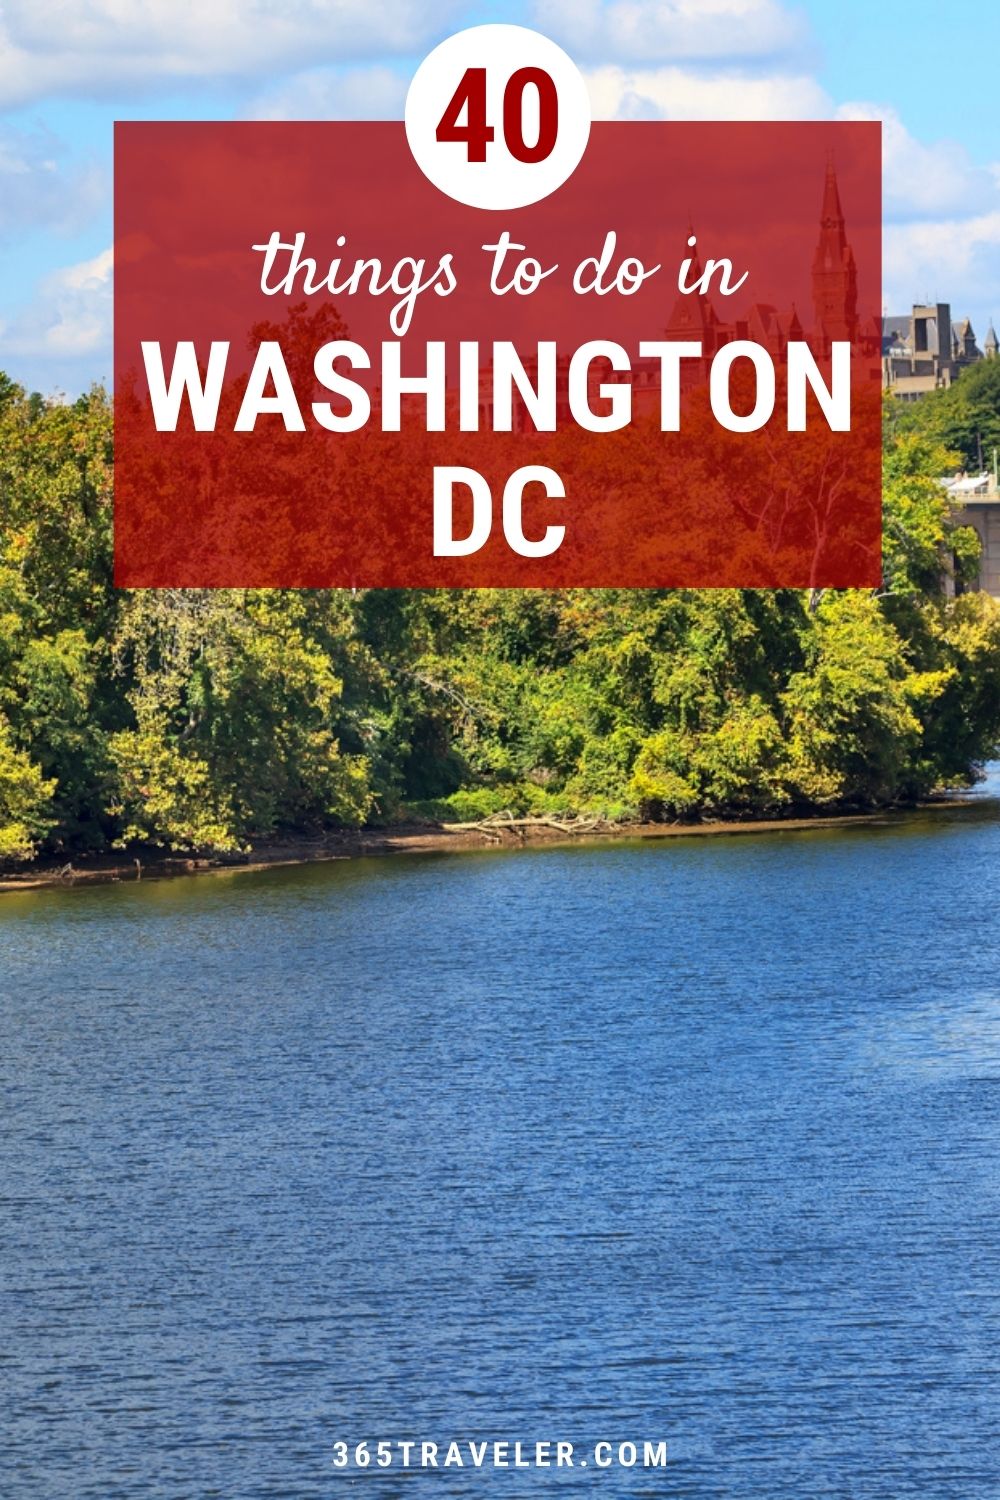 40+ THINGS TO DO IN WASHINGTON DC YOU CAN'T MISS